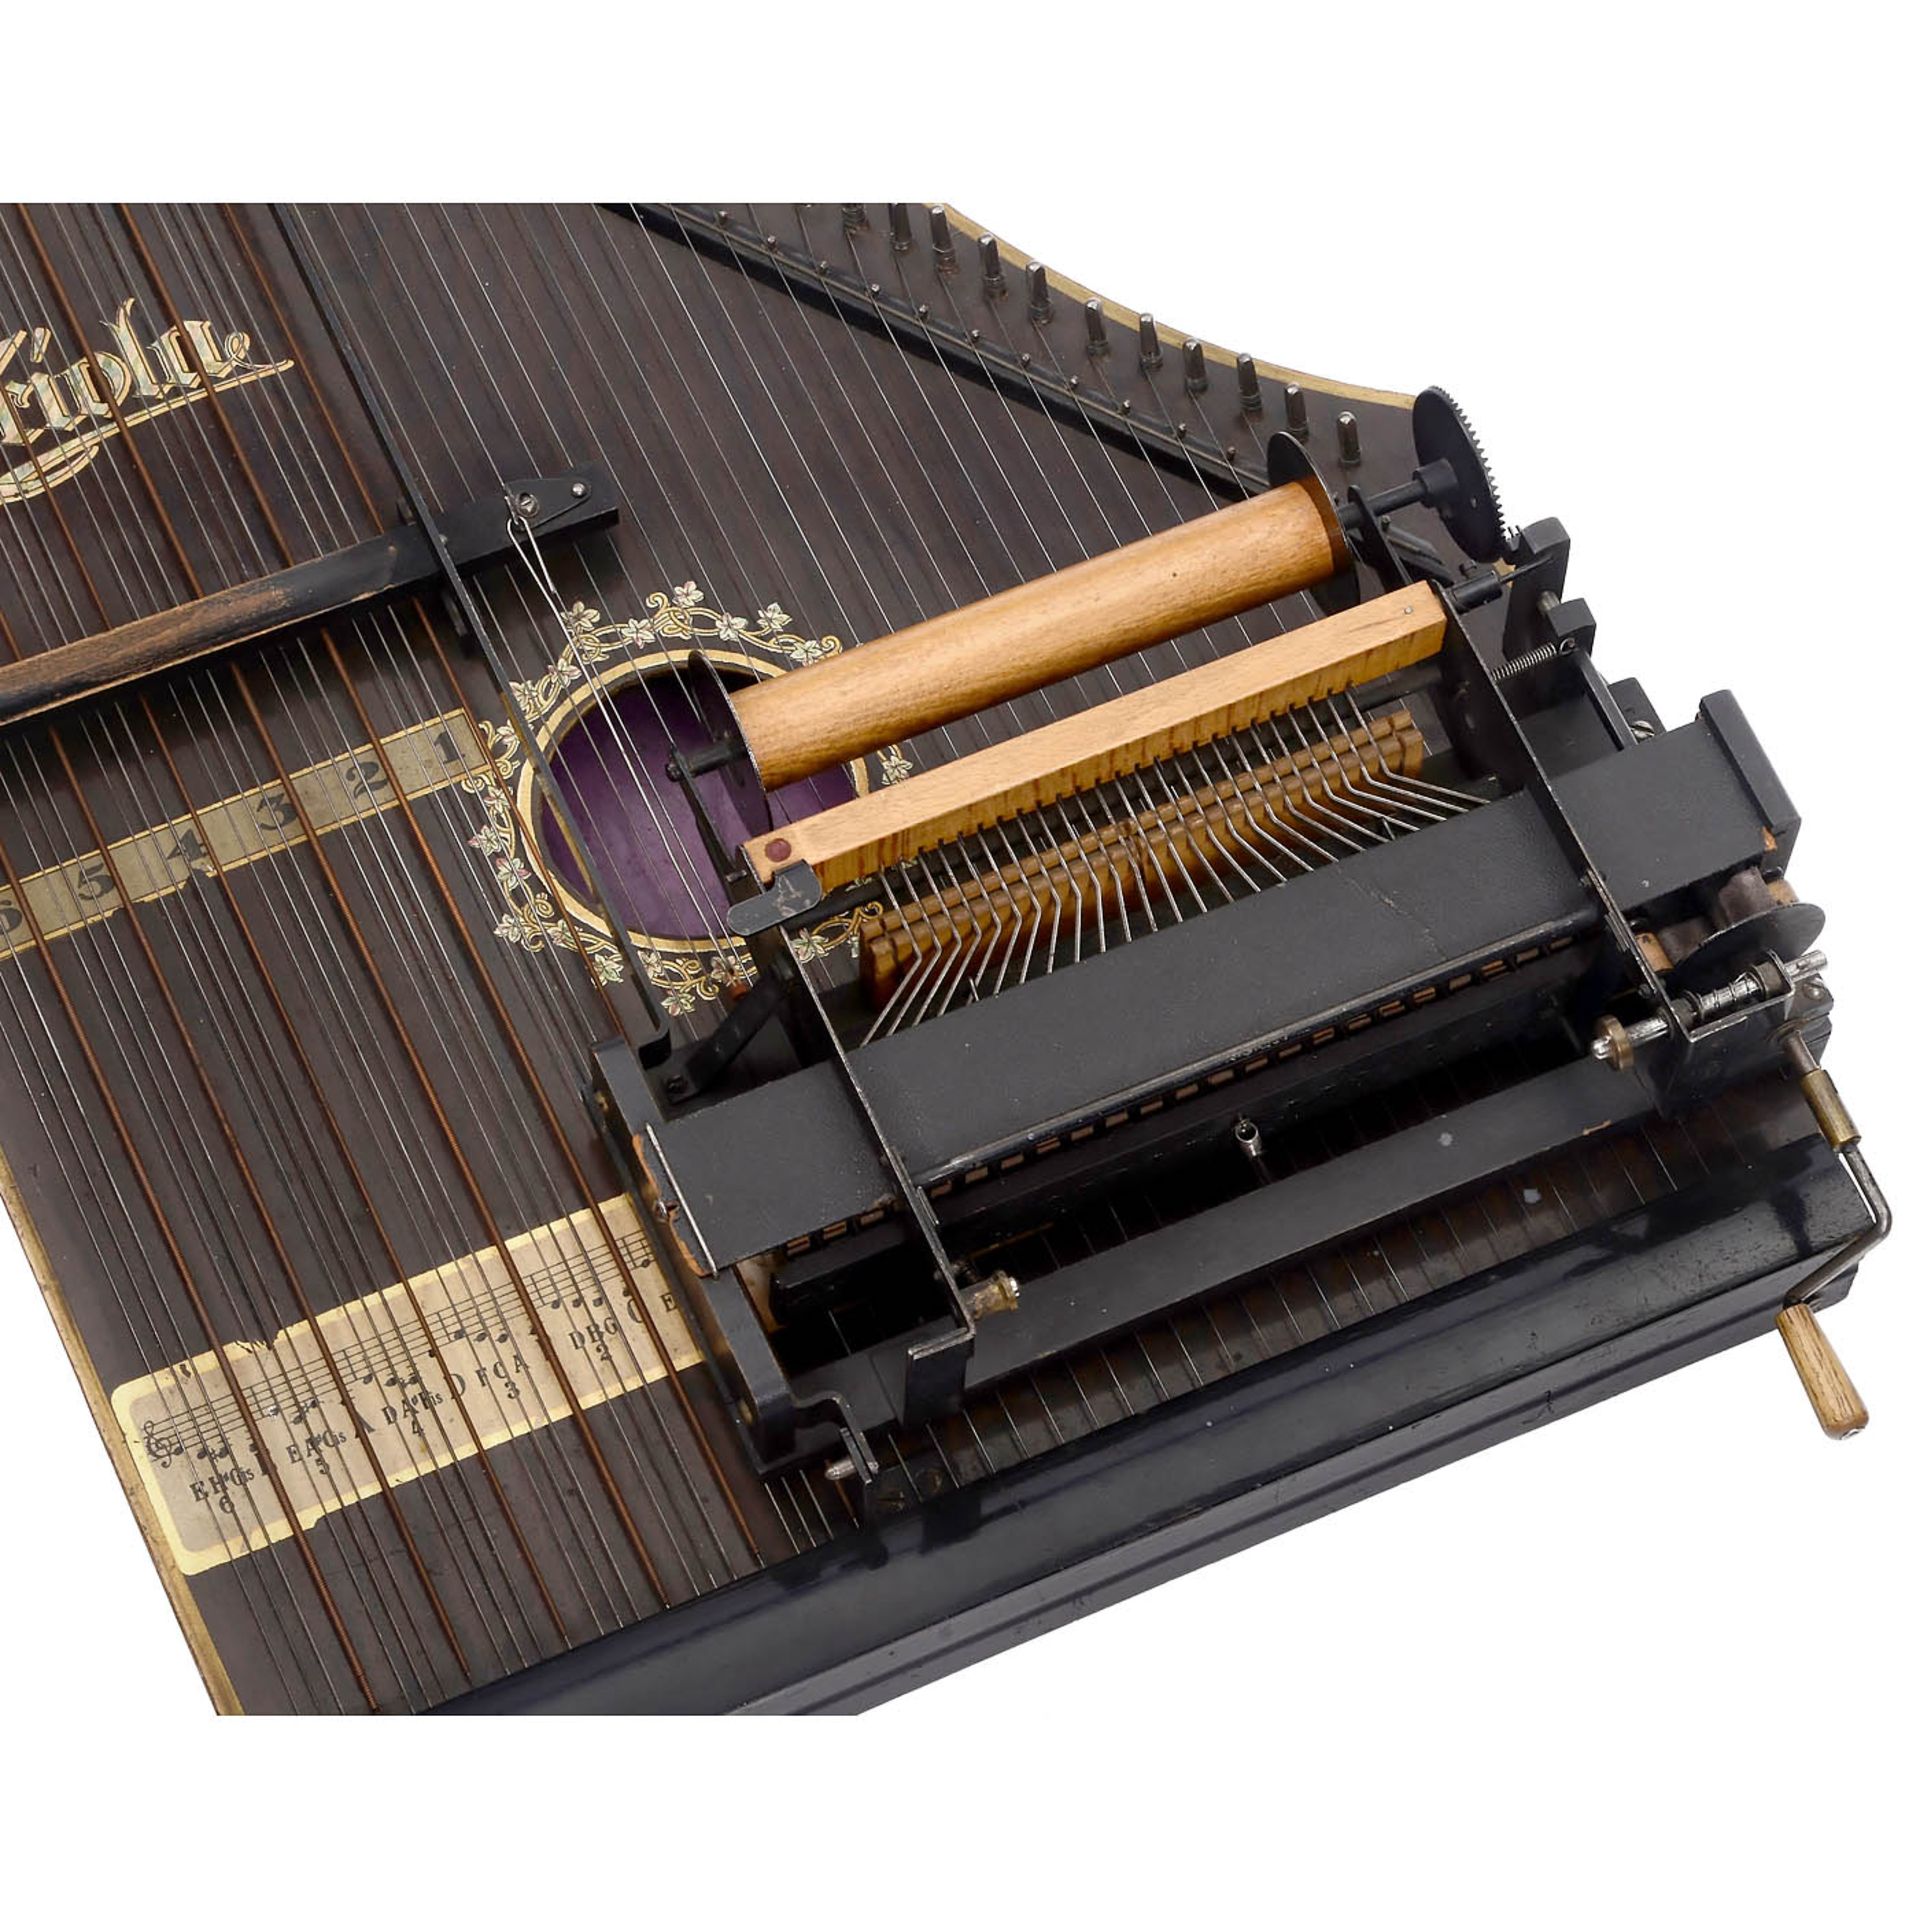 Triola Mechanical Zither with Music Roll "The Third Man" - Image 2 of 2